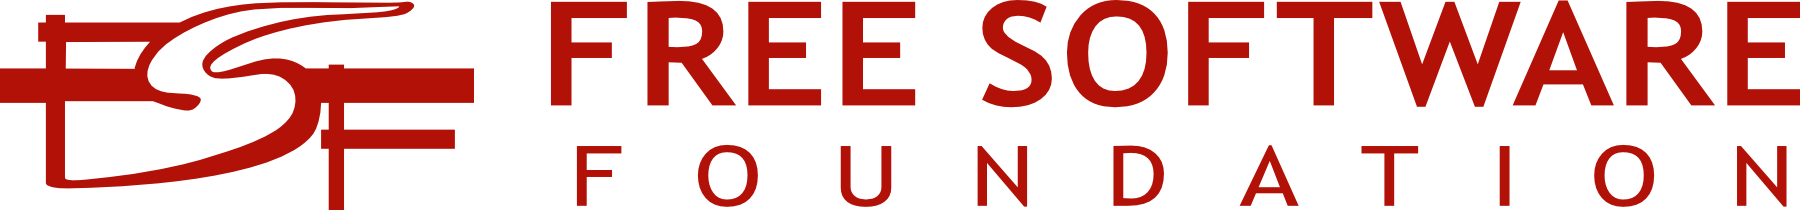 Free Software Foundation 